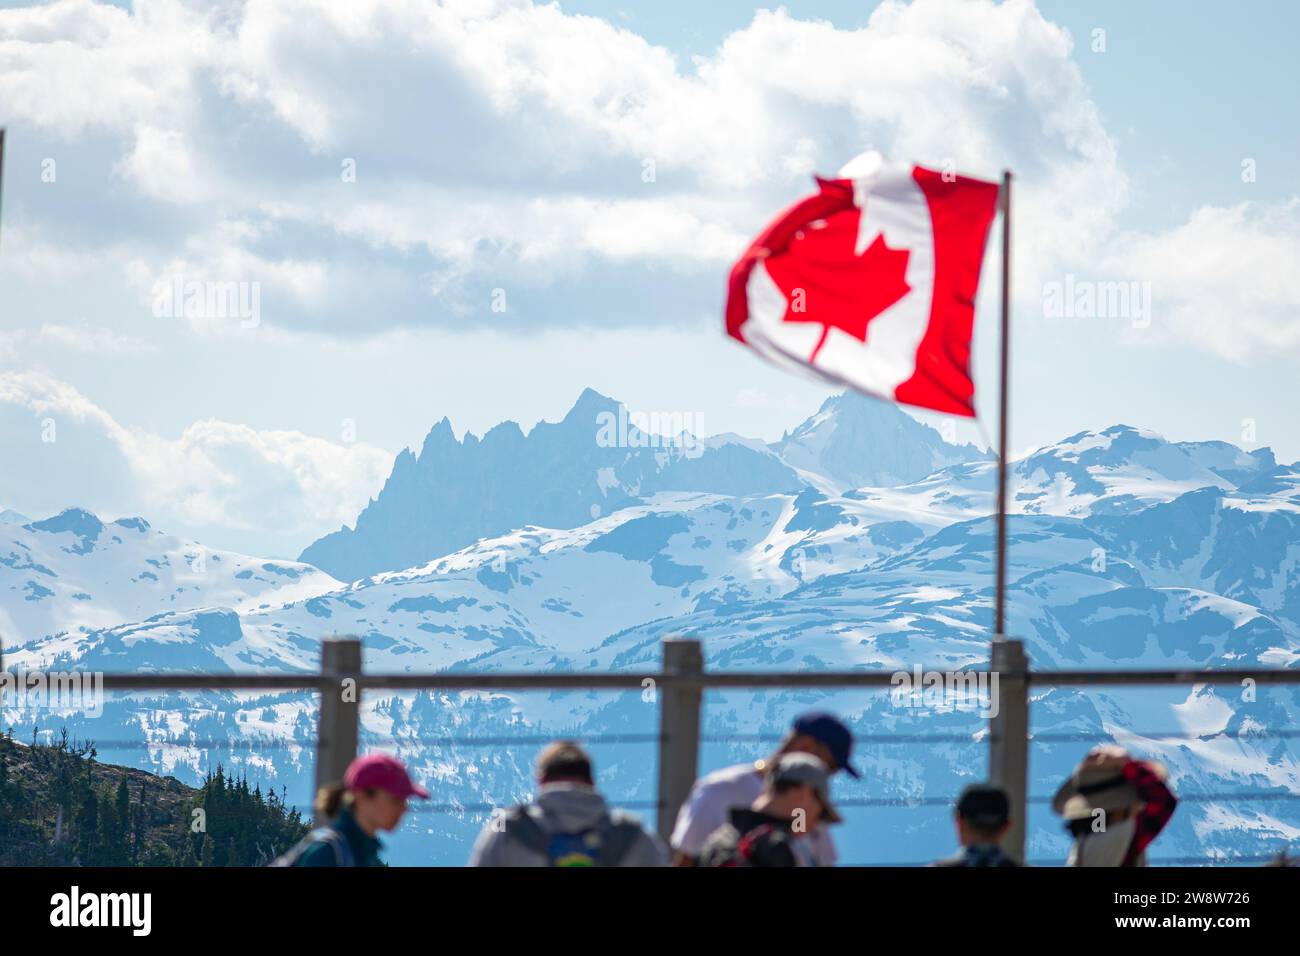 Visitors on Whistler Mountain gaze at the rugged beauty of the Canadian Rockies, with the national flag symbolizing Canada's rich natural heritage. Stock Photo